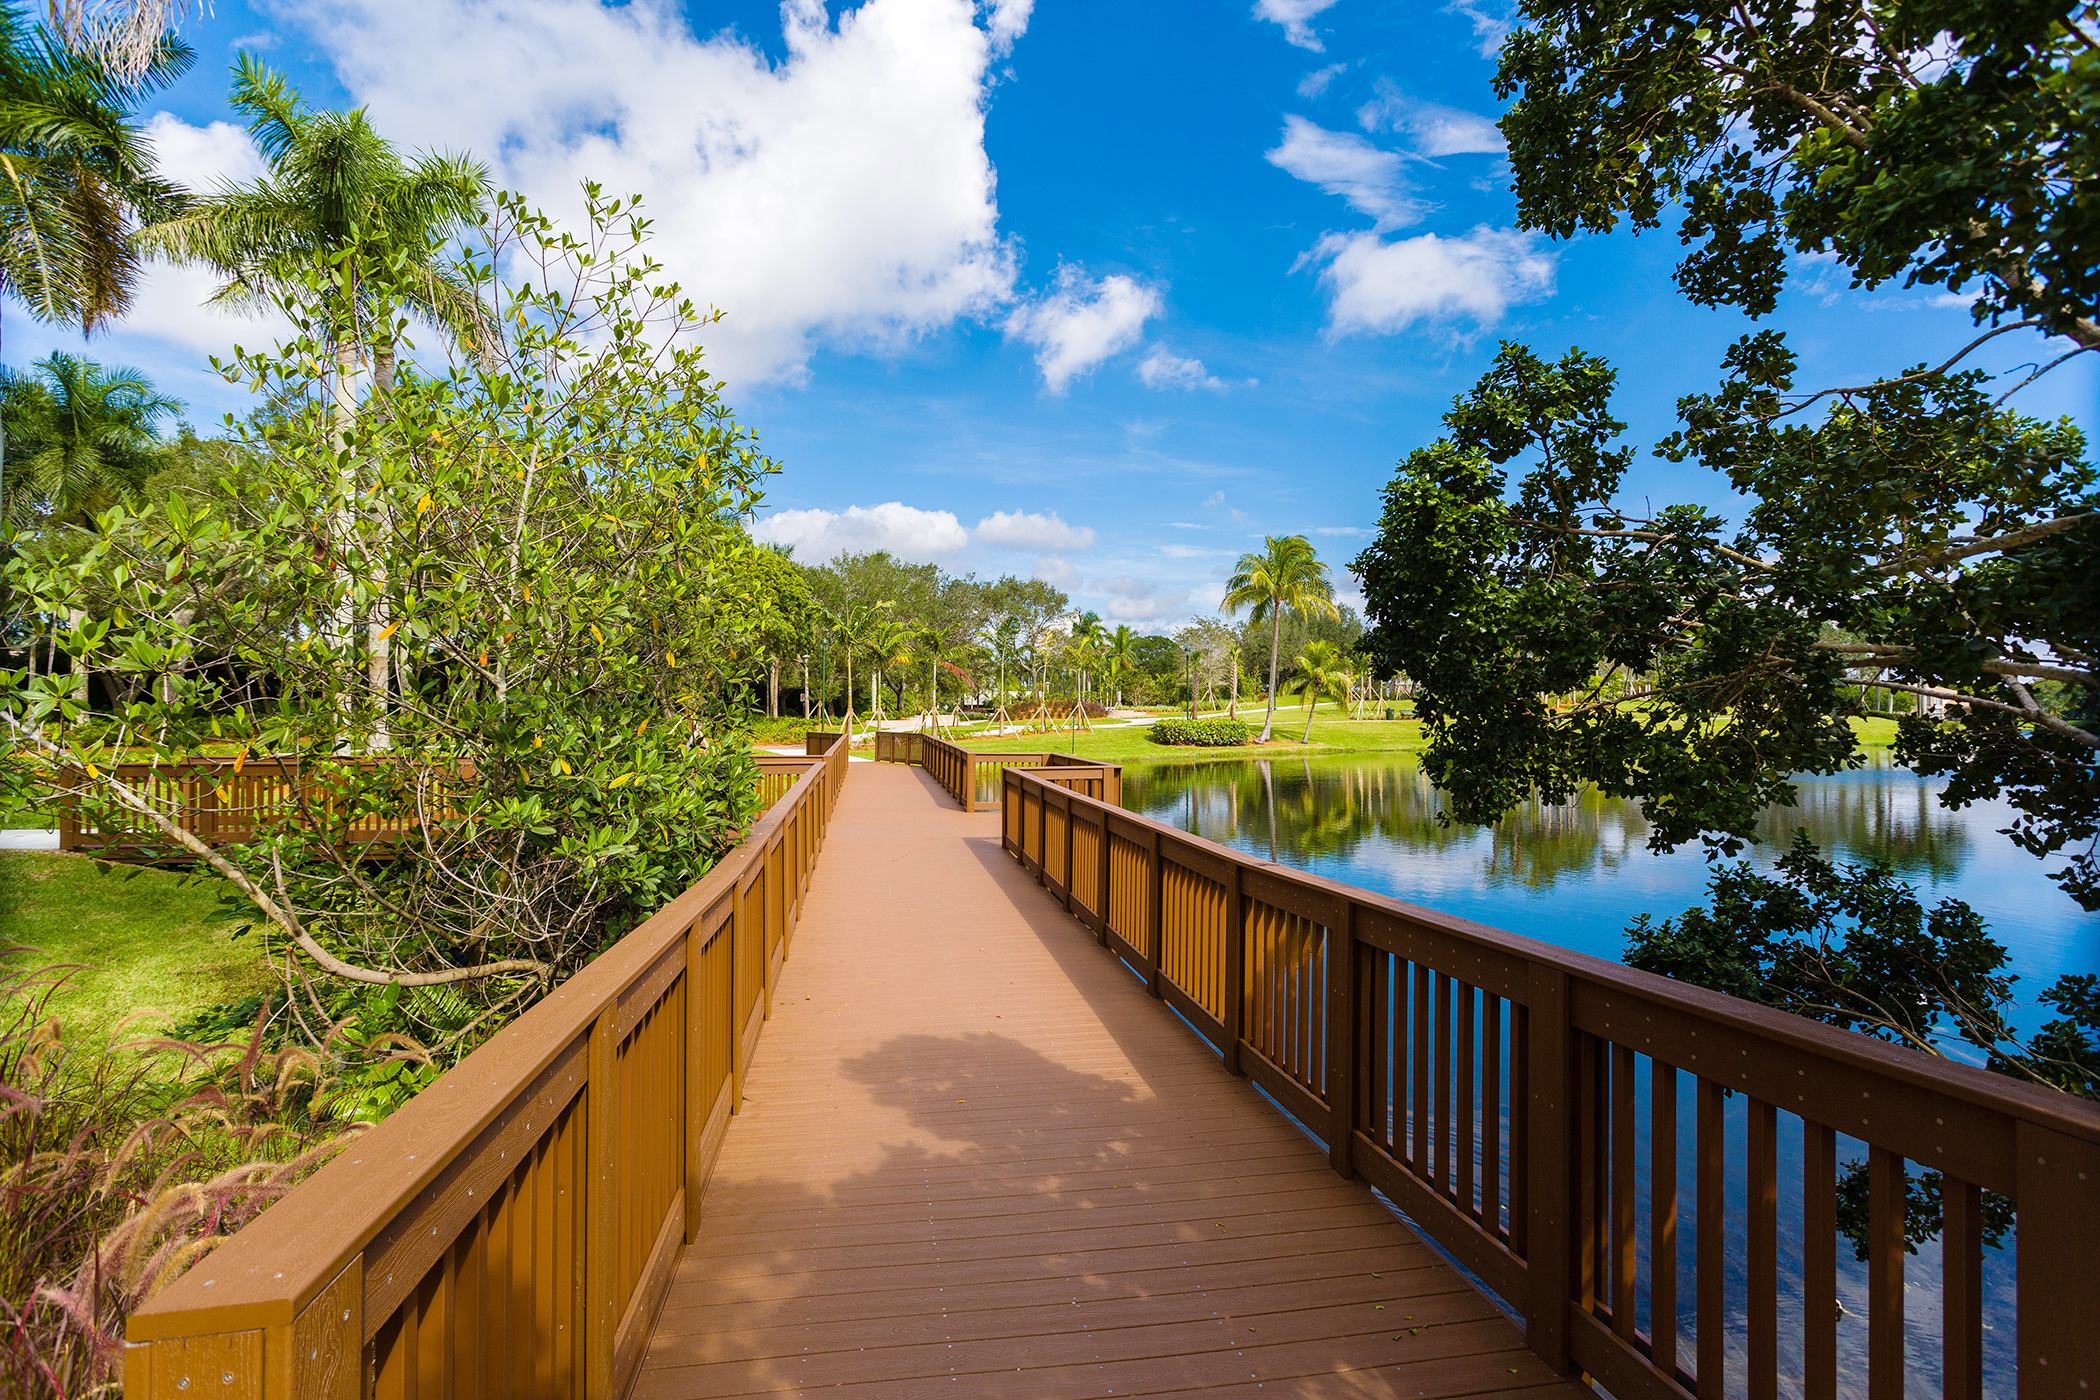 Weston, Florida. Sitting between the Atlantic Ocean to the east and the Everglades to the west, Weston has no shortage of green space, including a dozen sports fields, nearly 50 miles of lined bike lanes, and the 100-acre Weston Regional Park.